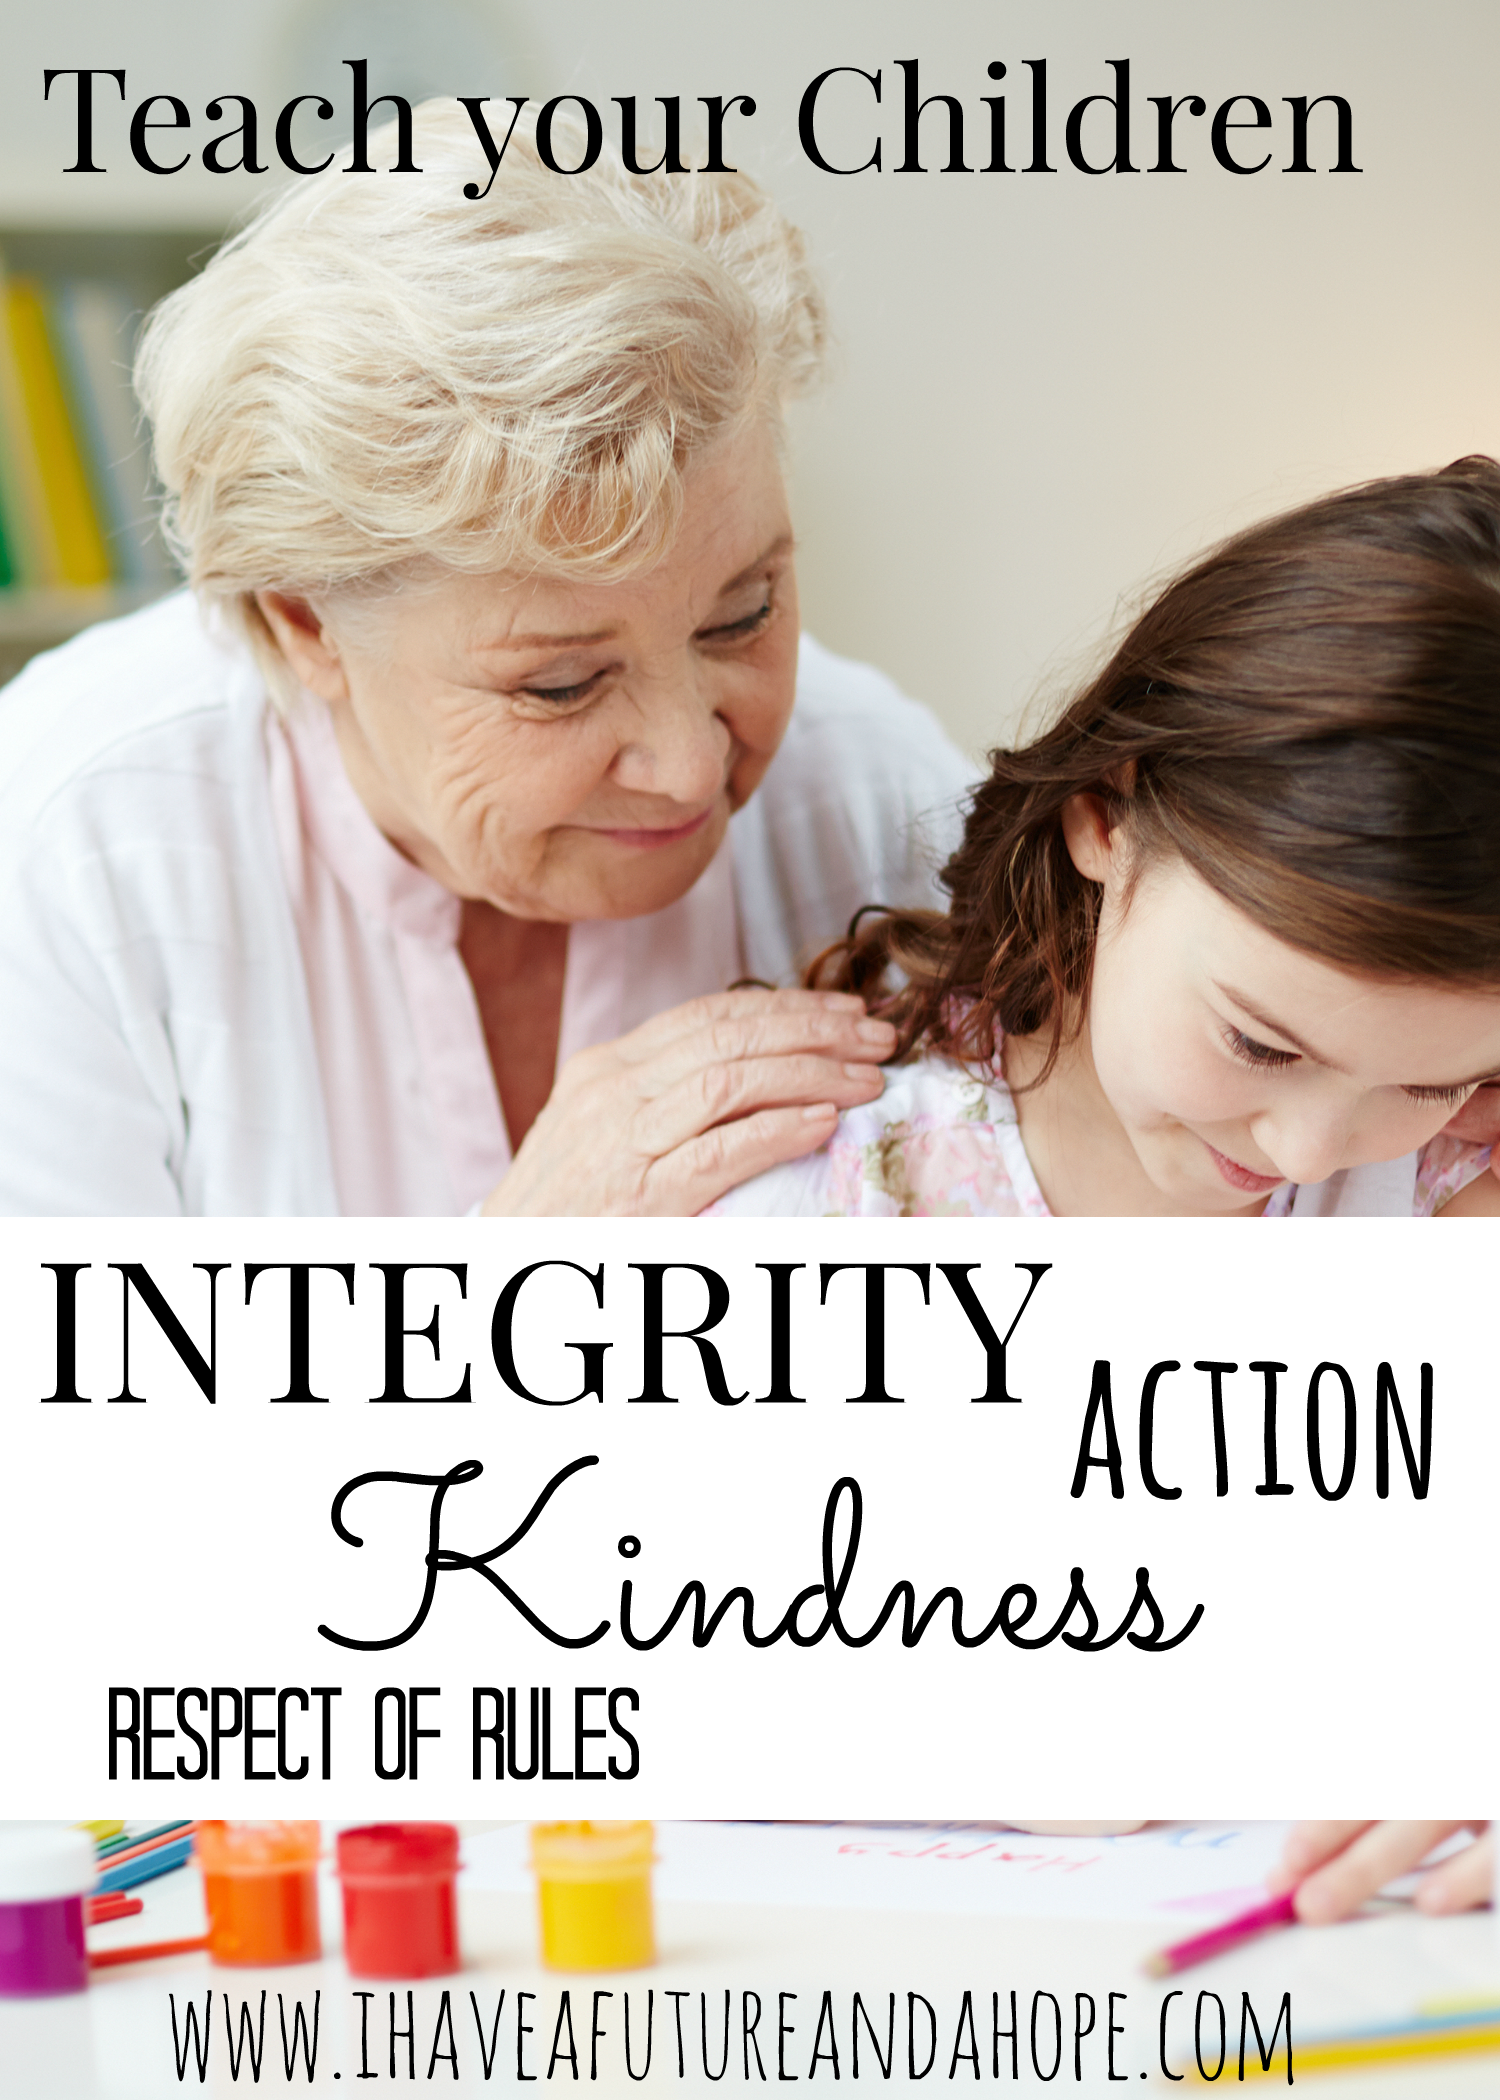 31 Days of Homeschool Supplies: Teach your children character, integrity, kindness, action, and respect of rules with these great posters.